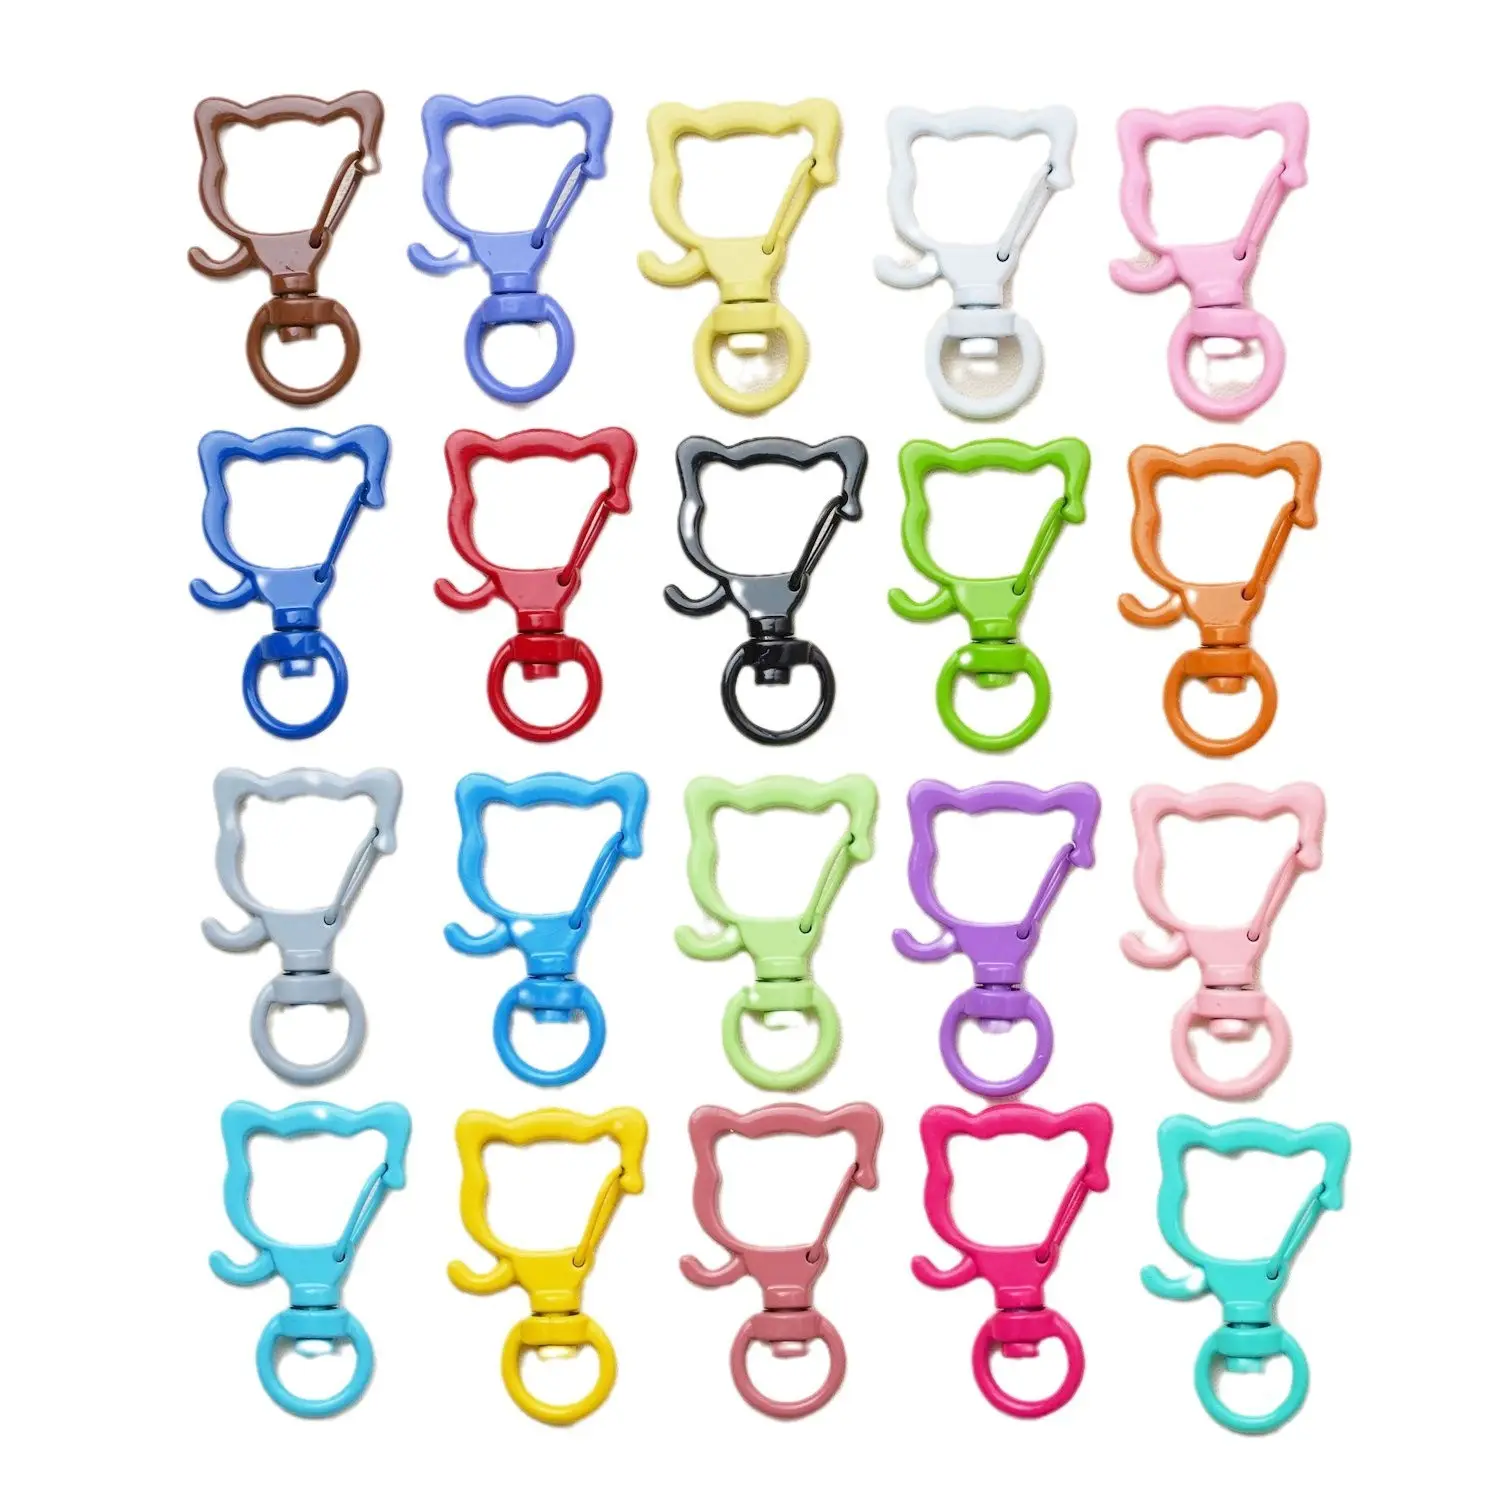 Wholesale high quality cat shape ring clasp metal snap hooks for bag hanging pendant charms DIY key chain connector clasp hooks